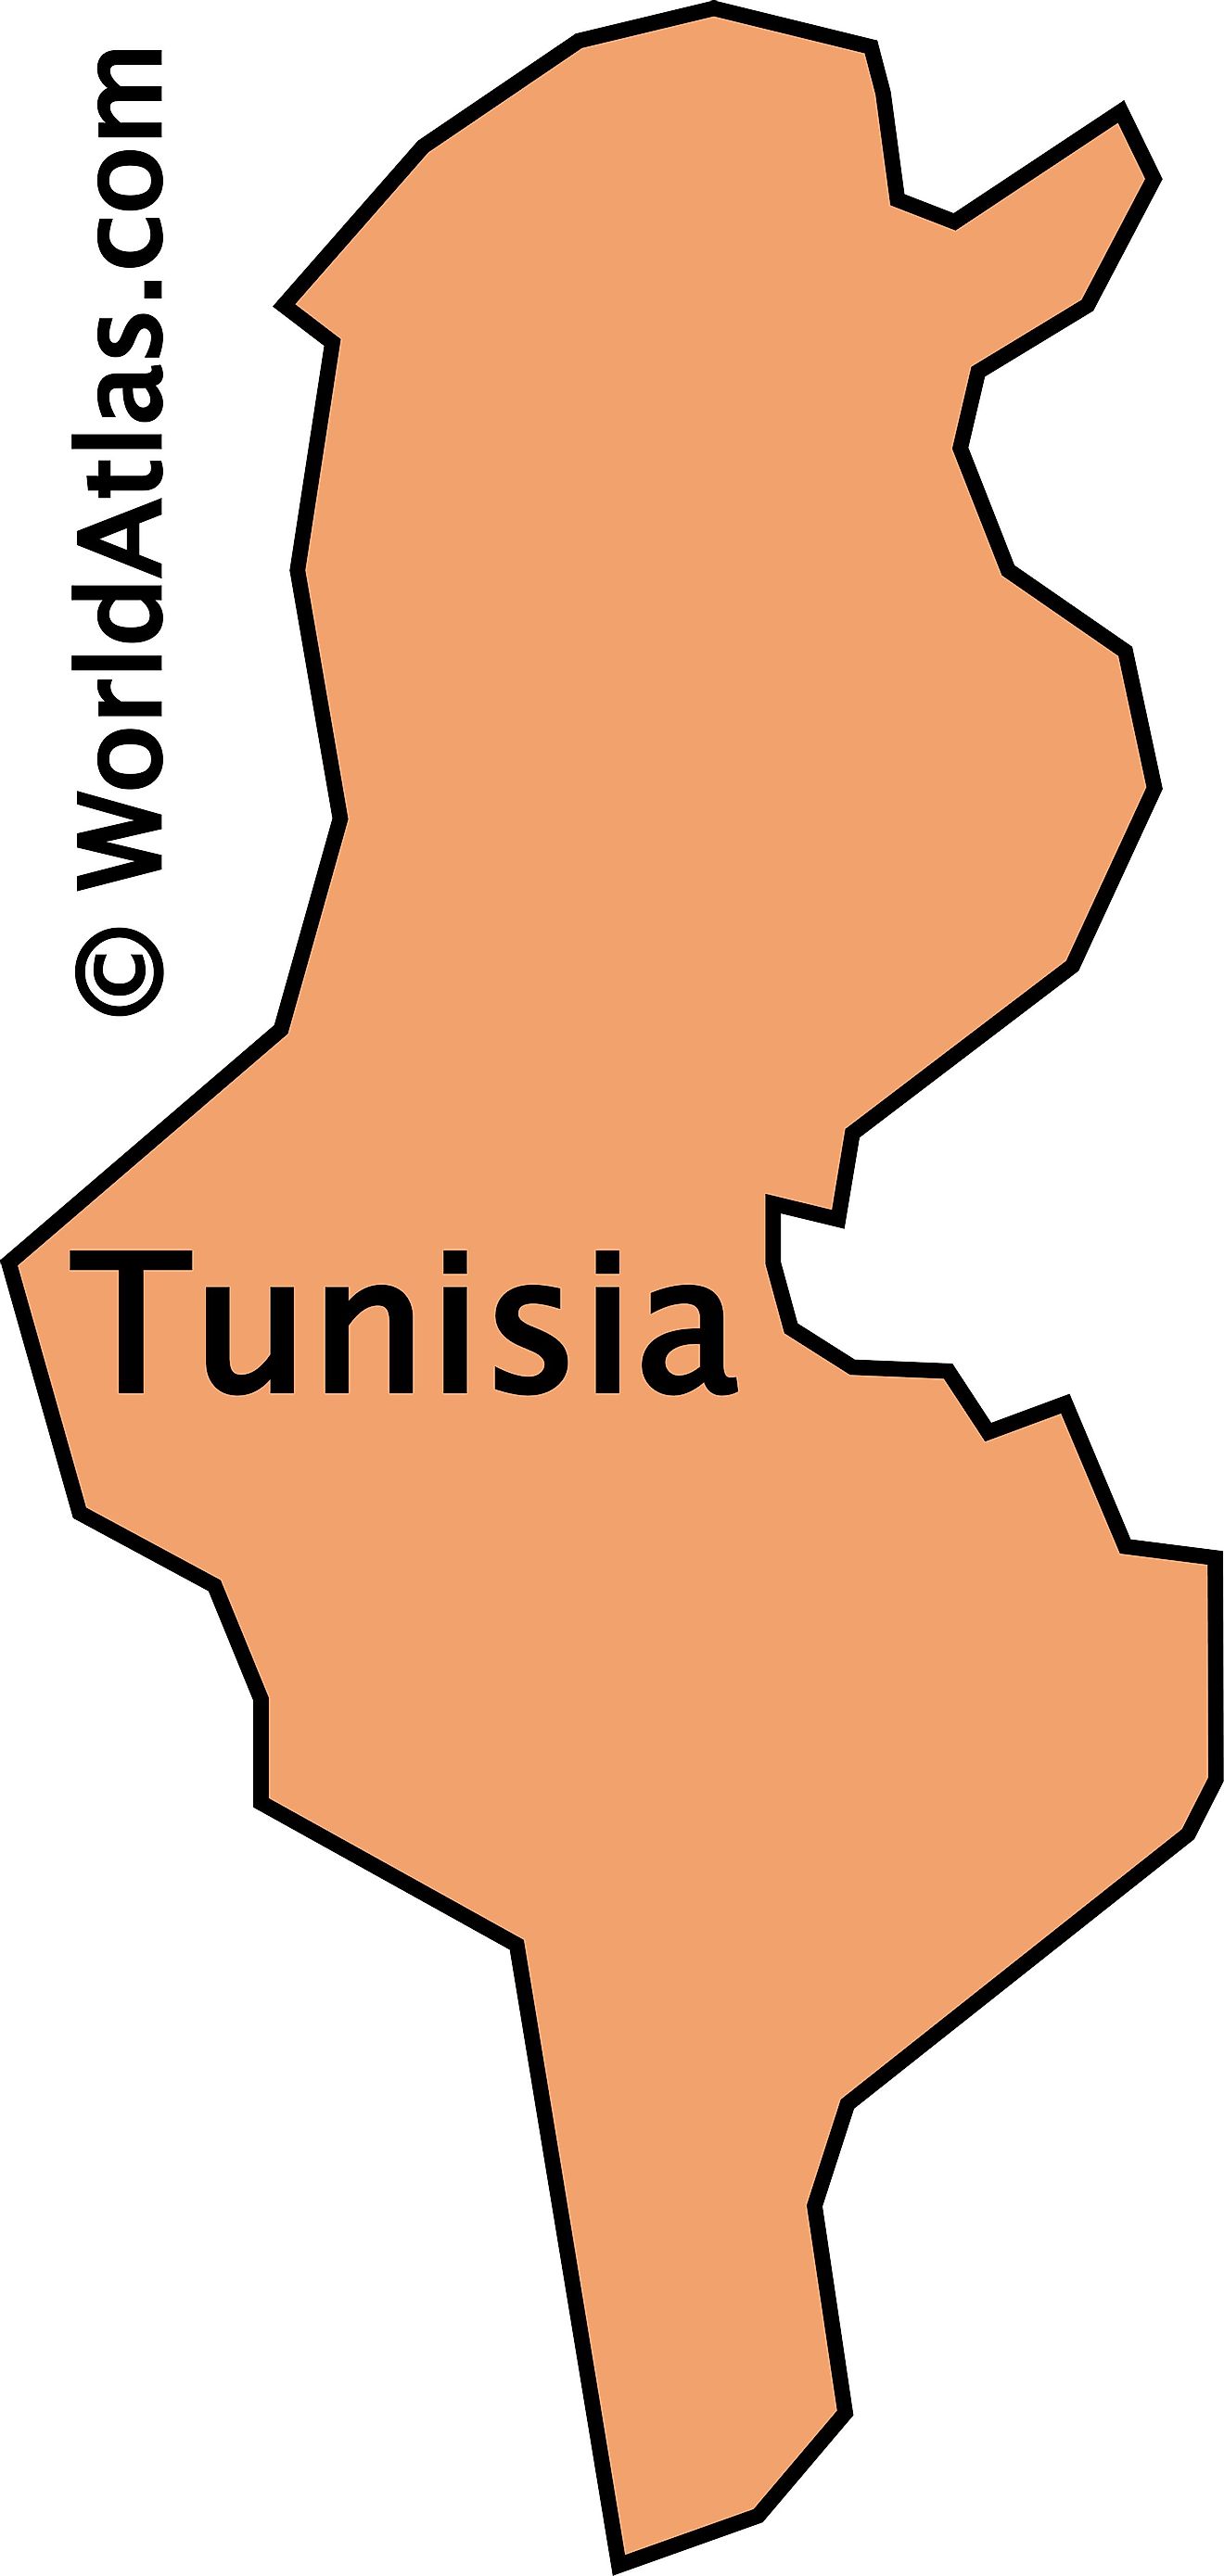 Outline Map of Tunisia